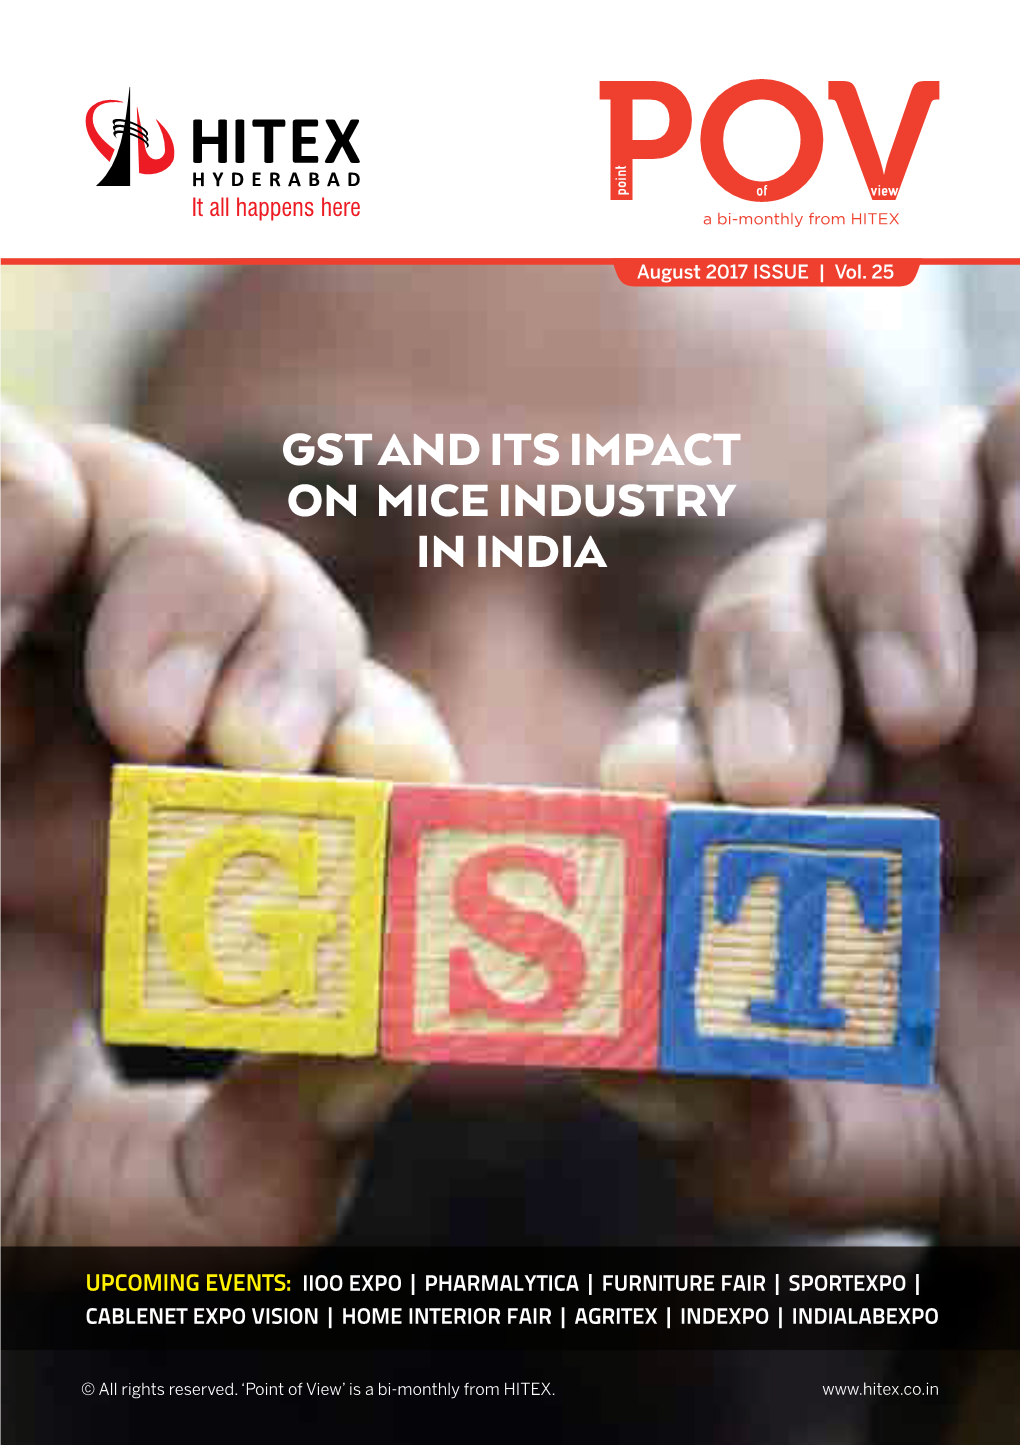 GST and Its Impact on MICE Industry in India